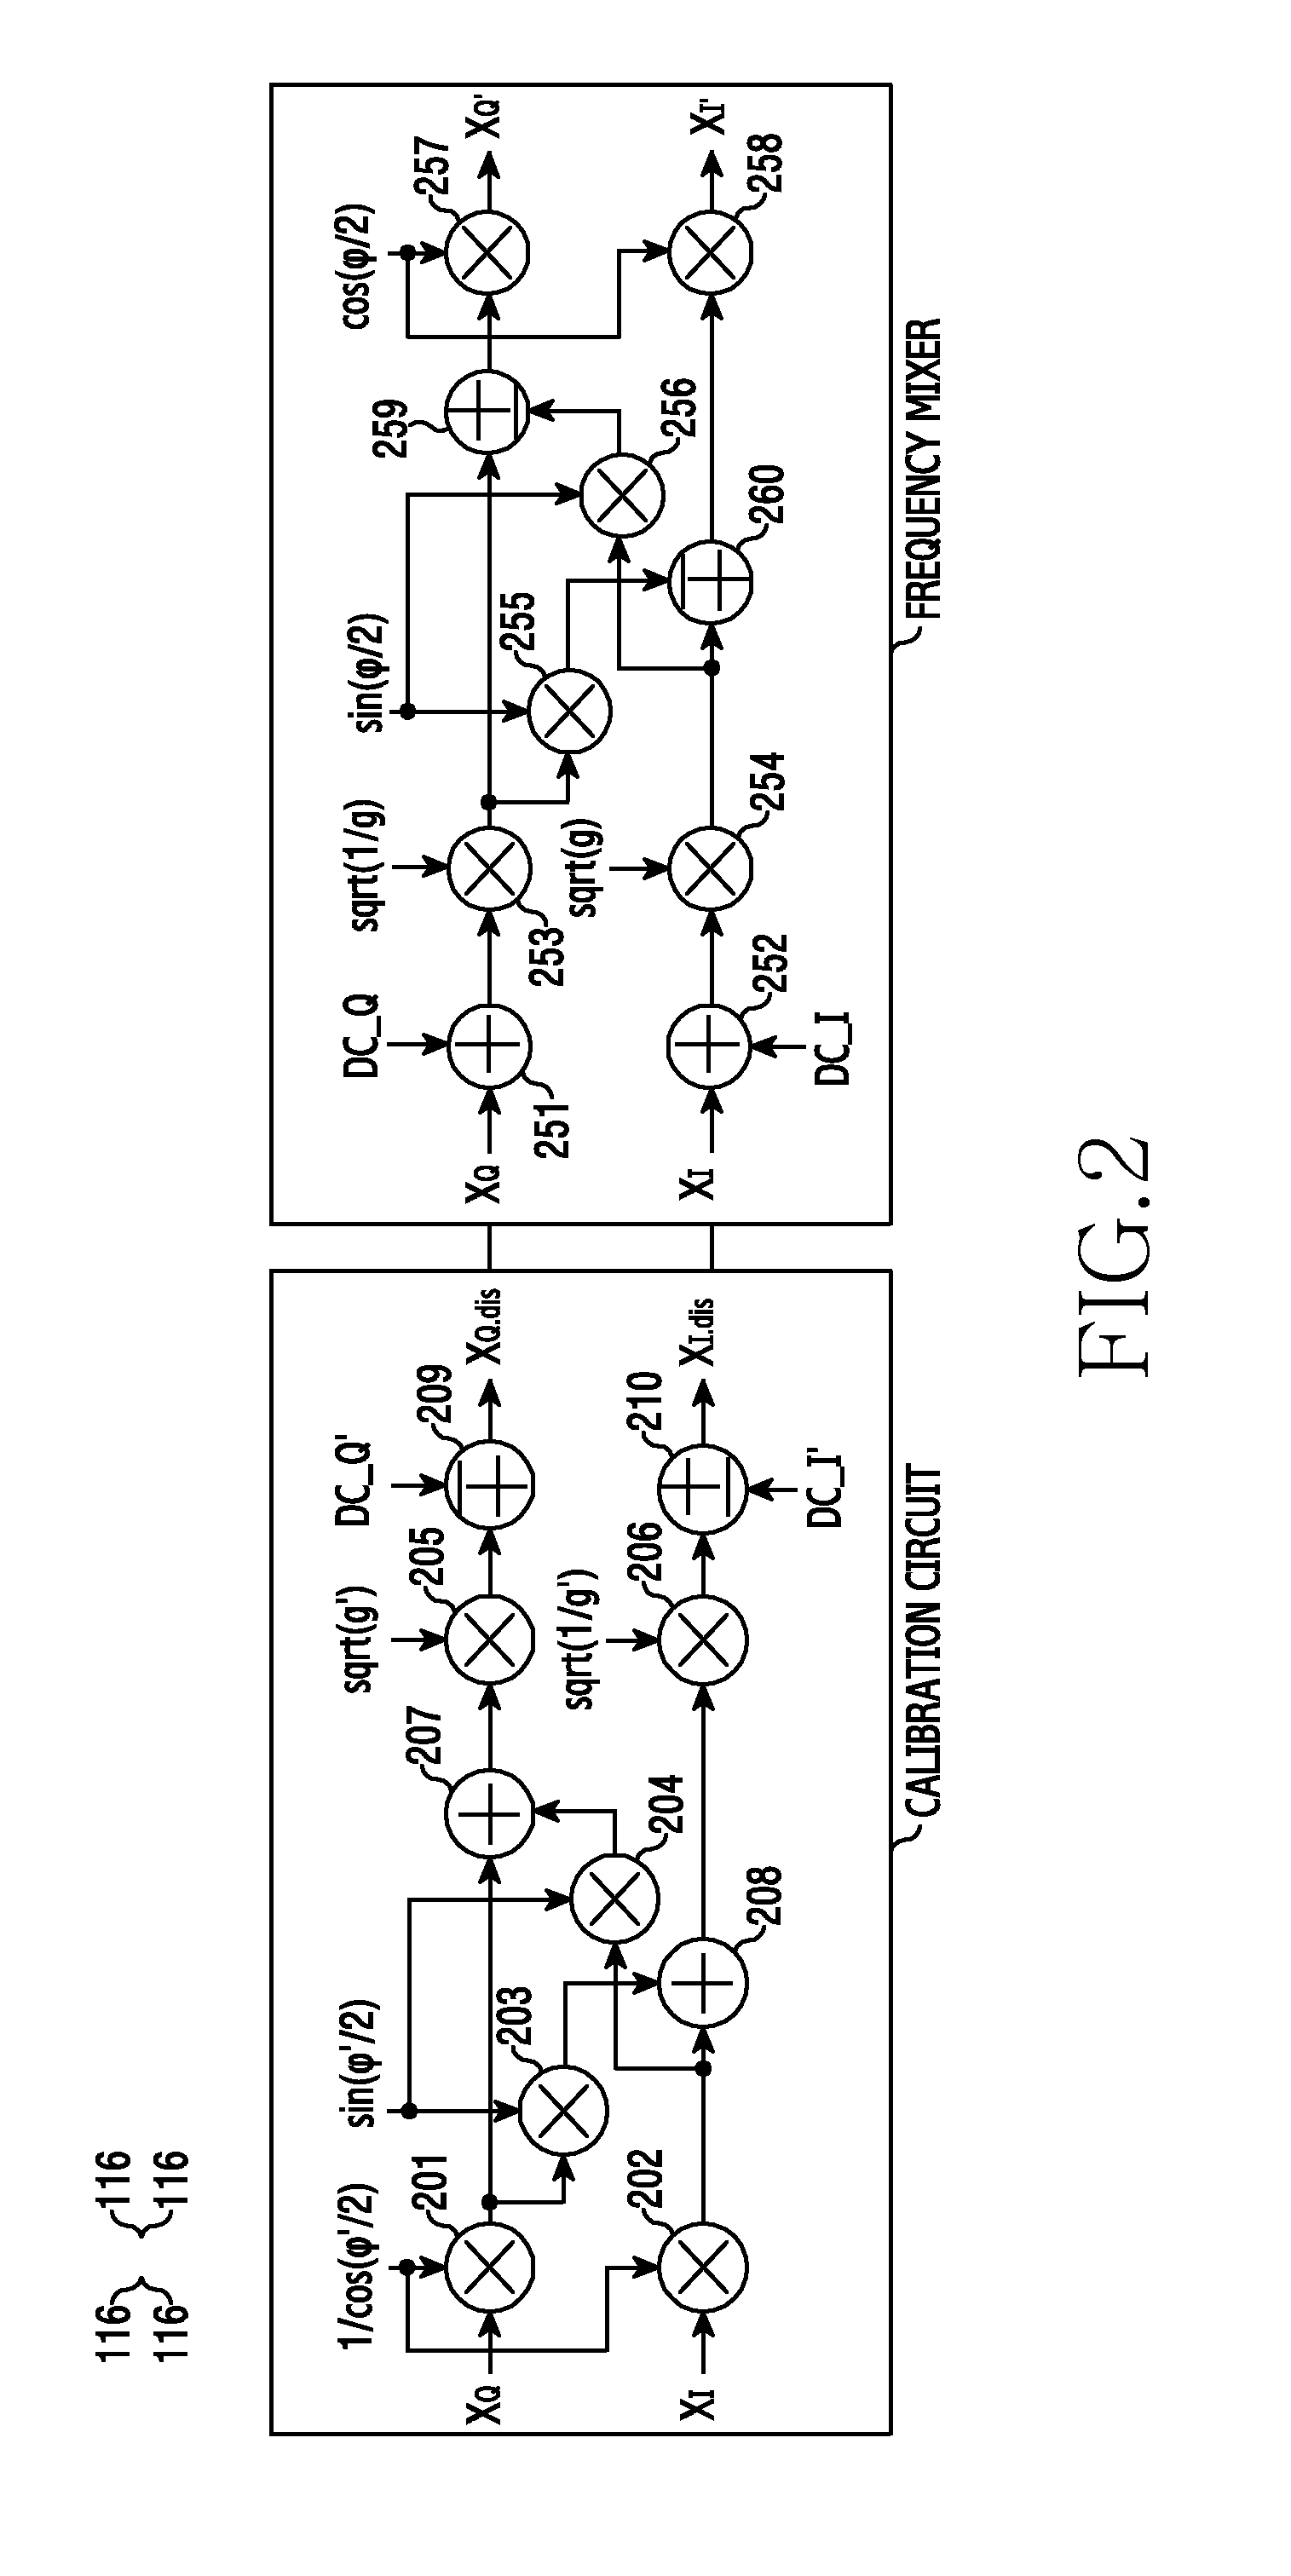 Method and apparatus for calibrating distortion of signals